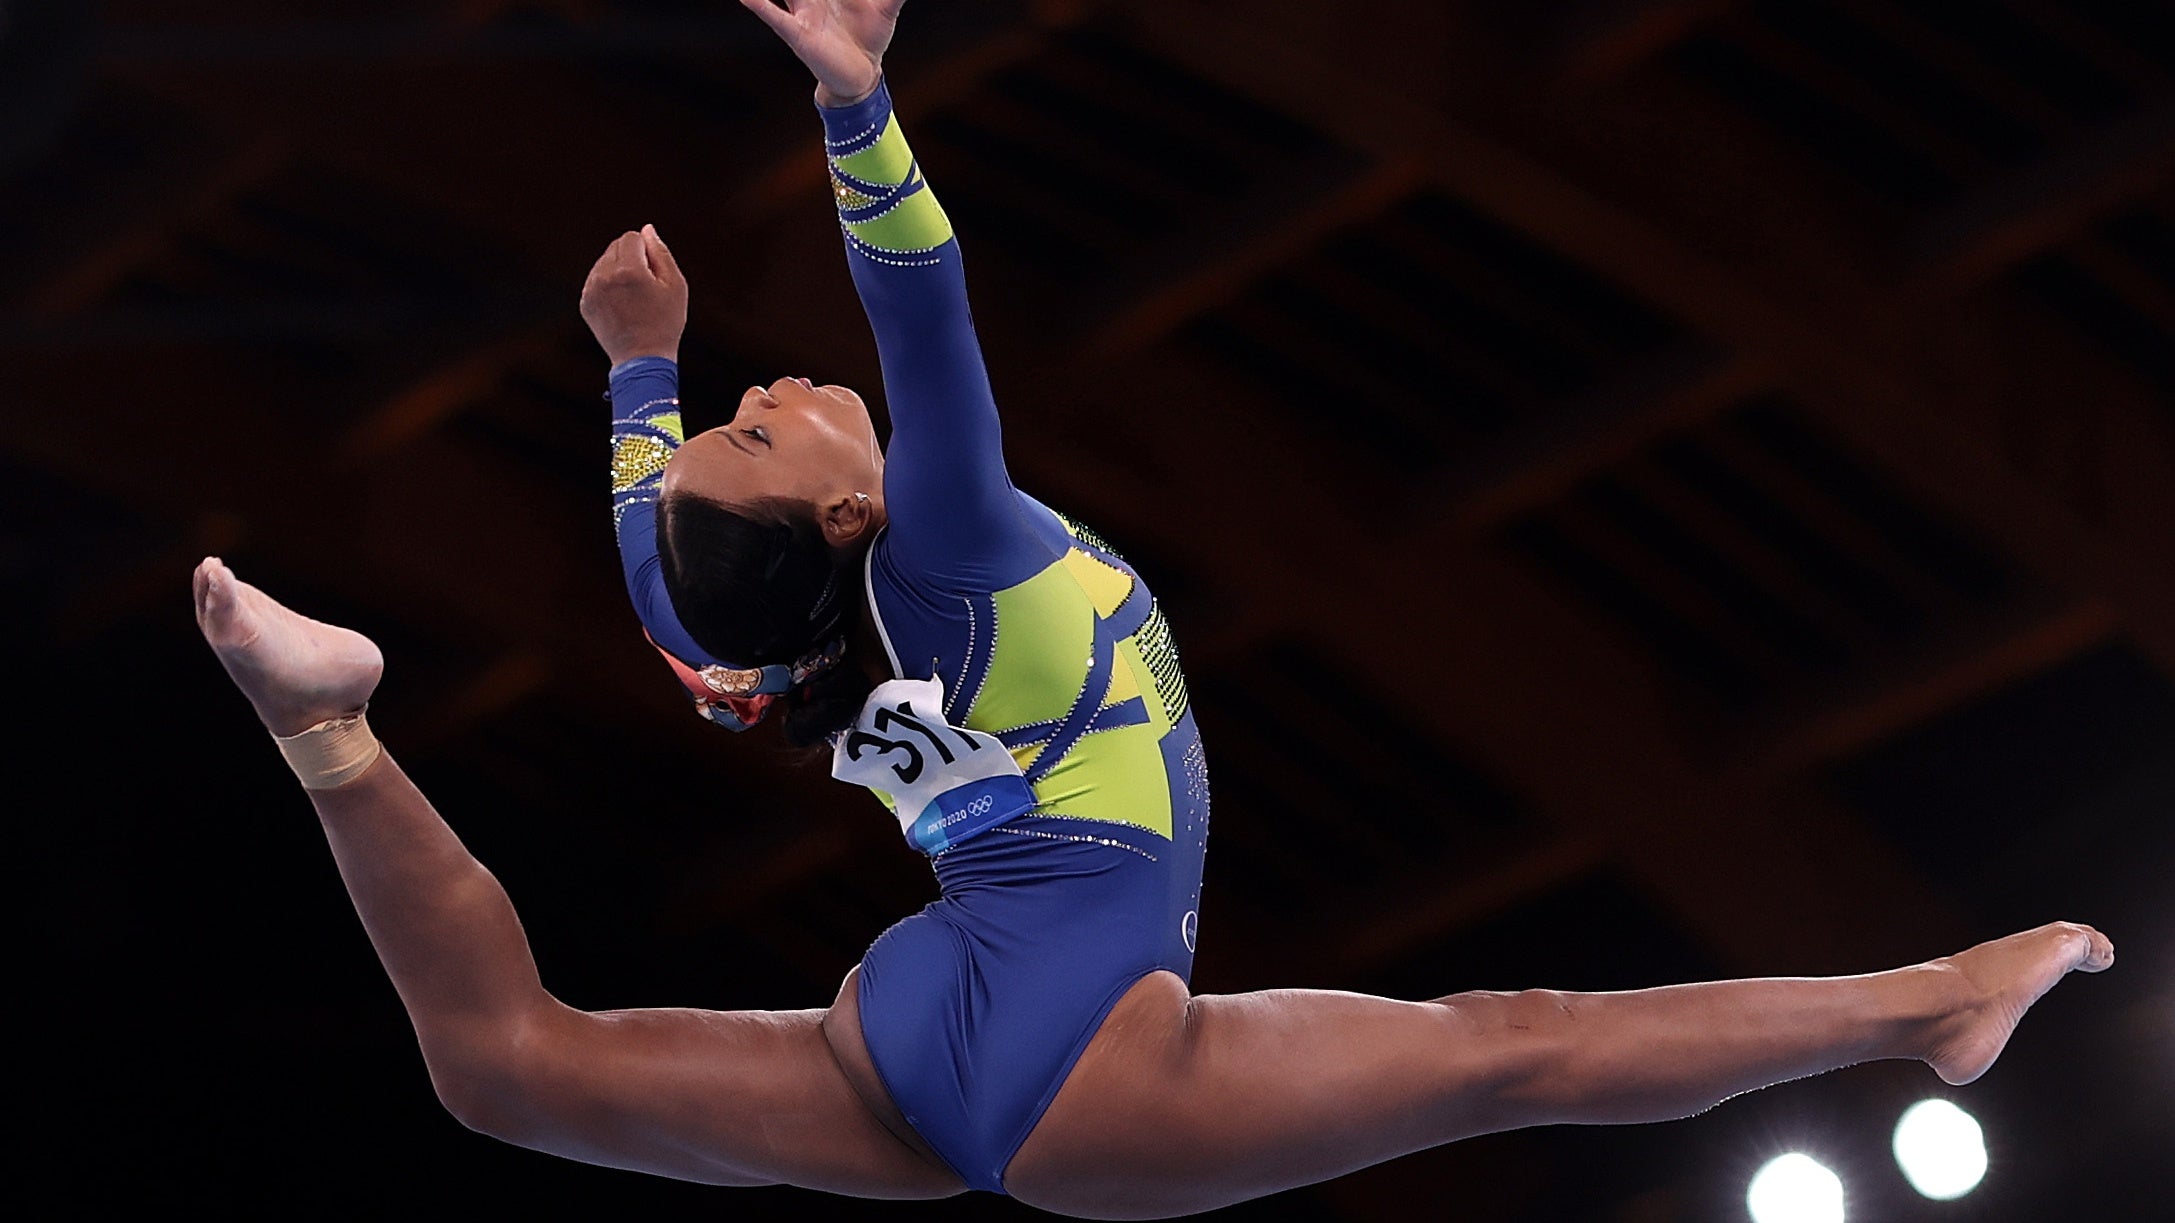 Rebeca Andrade Is The First Brazilian To Win An Olympic Medal In Women’s Gymnastics